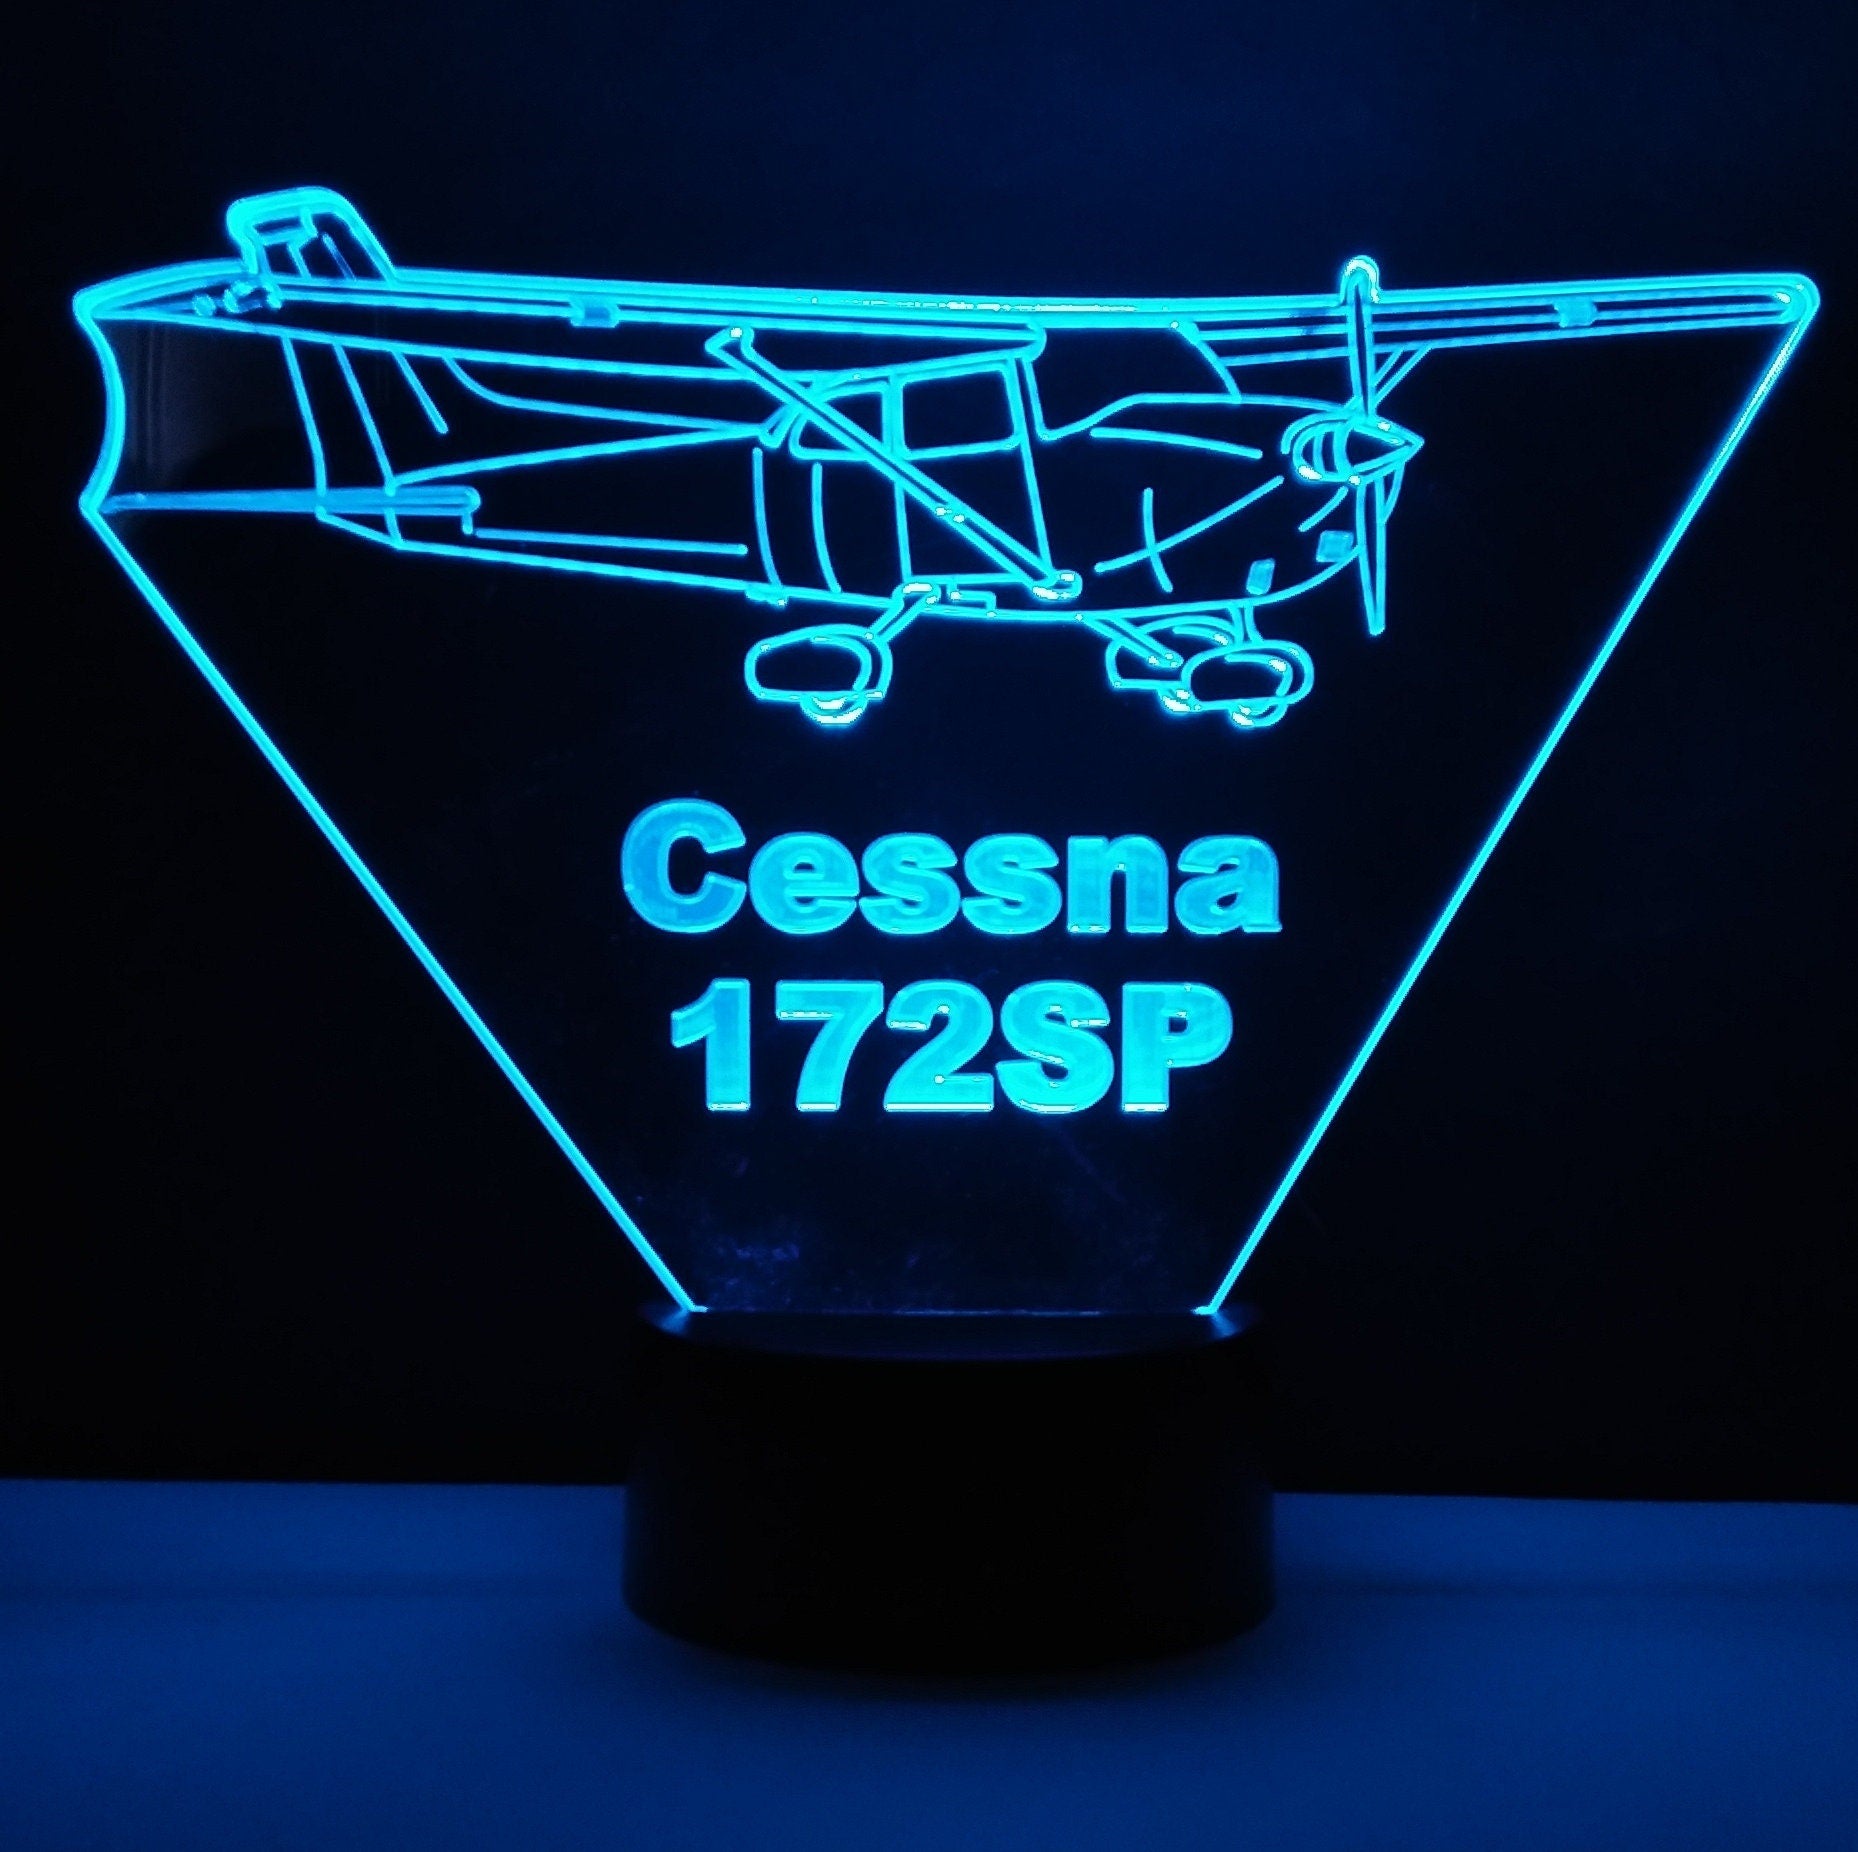 Awesome "Cessna 172SP Airplane" 3D LED Lamp (1180) - FREE SHIPPING!